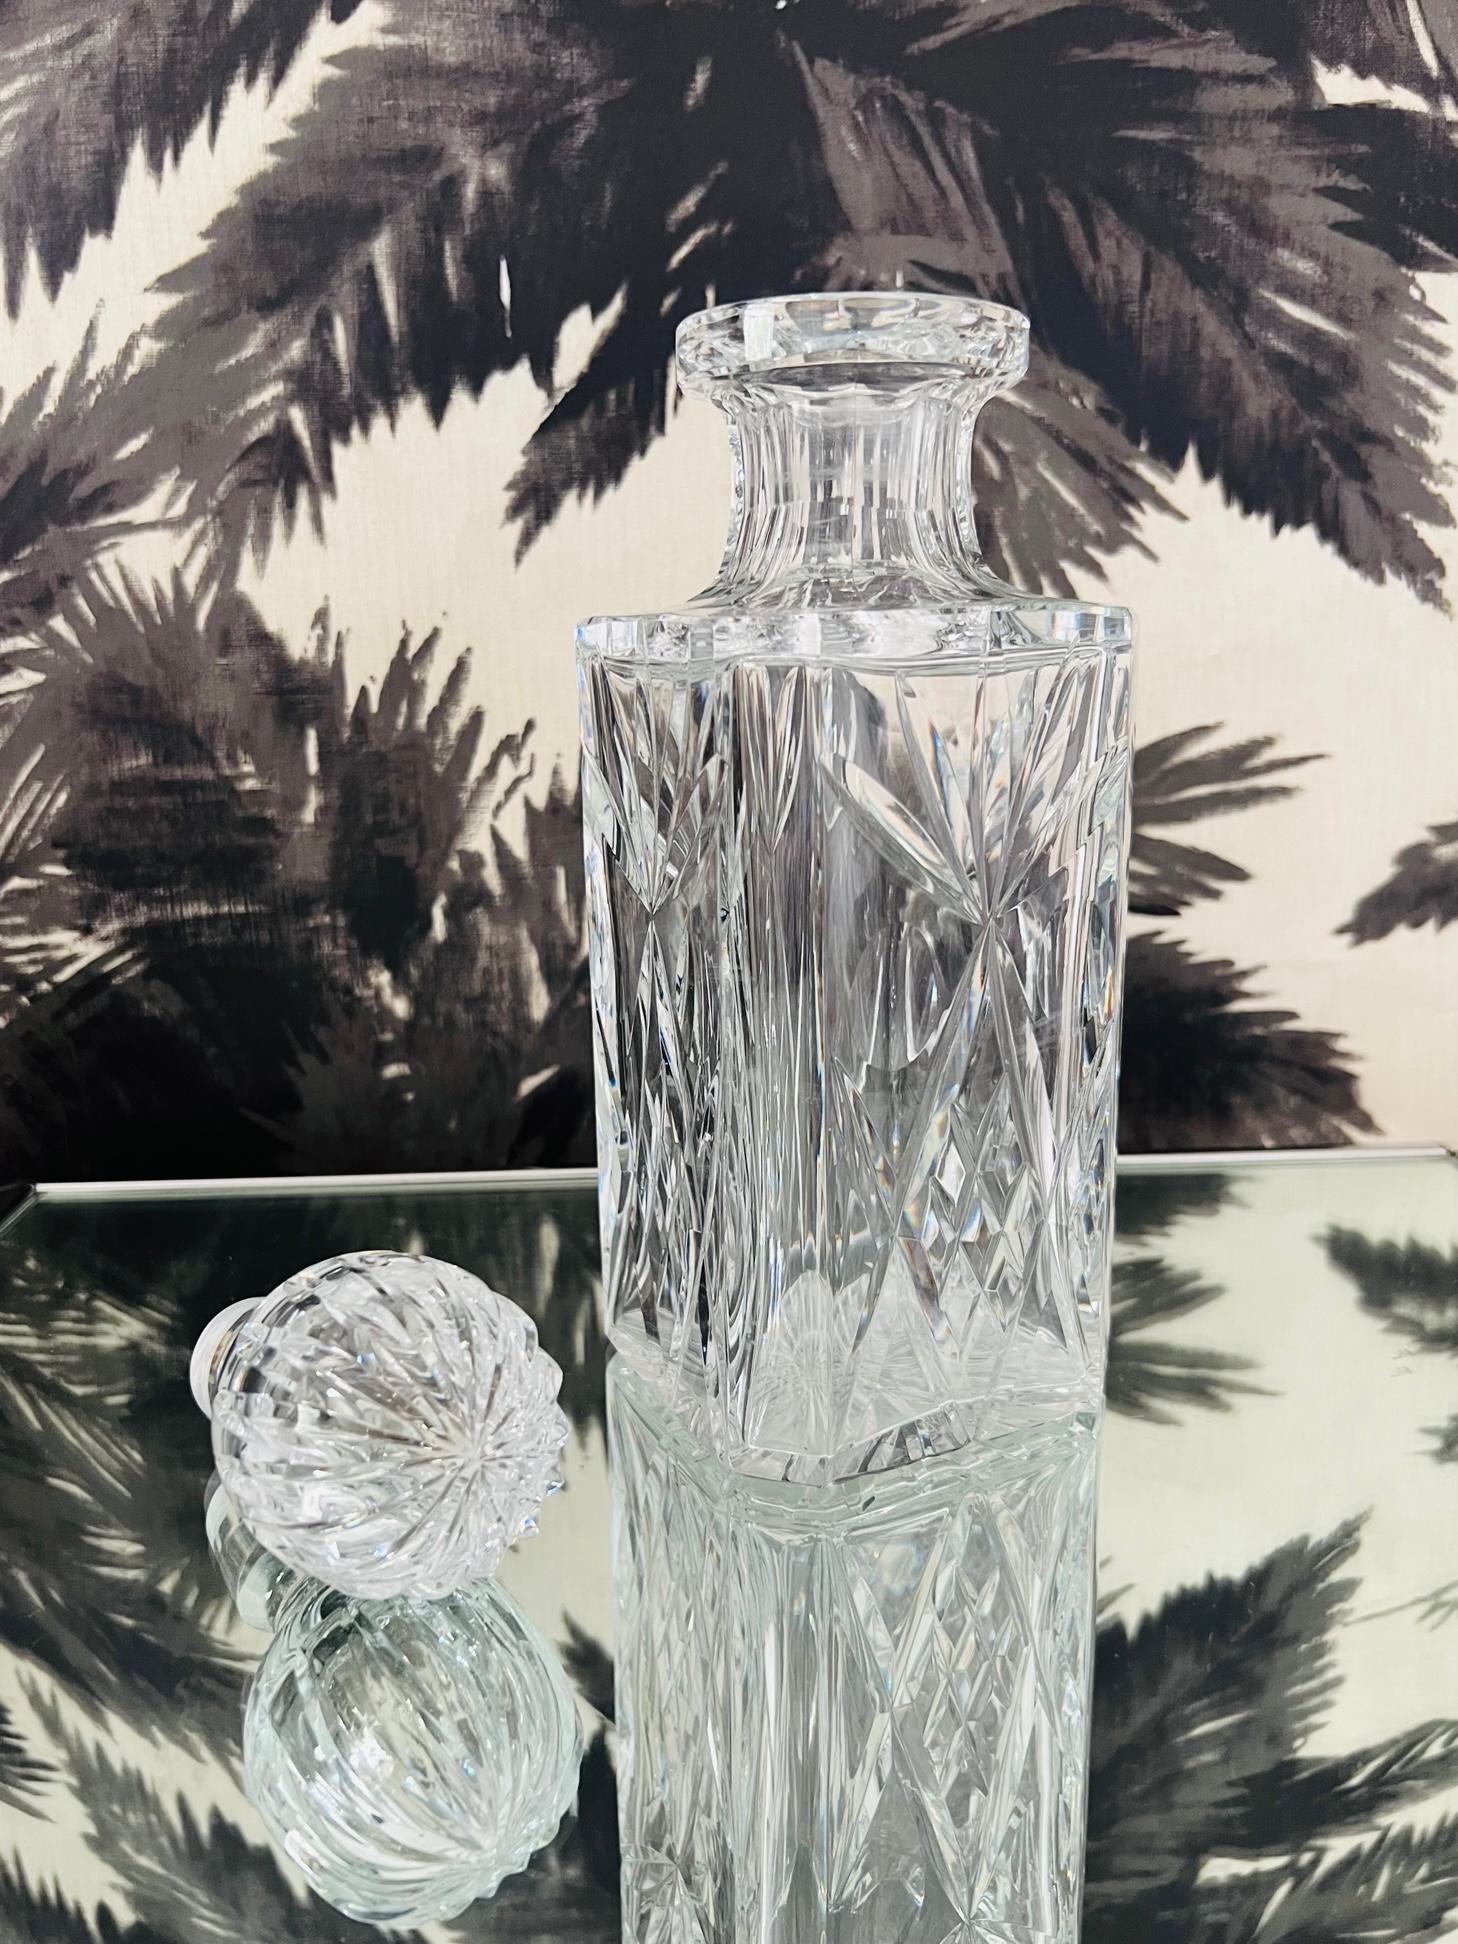 Edwardian Vintage Waterford Crystal Whiskey Decanter with Etched Designs, C. 1980